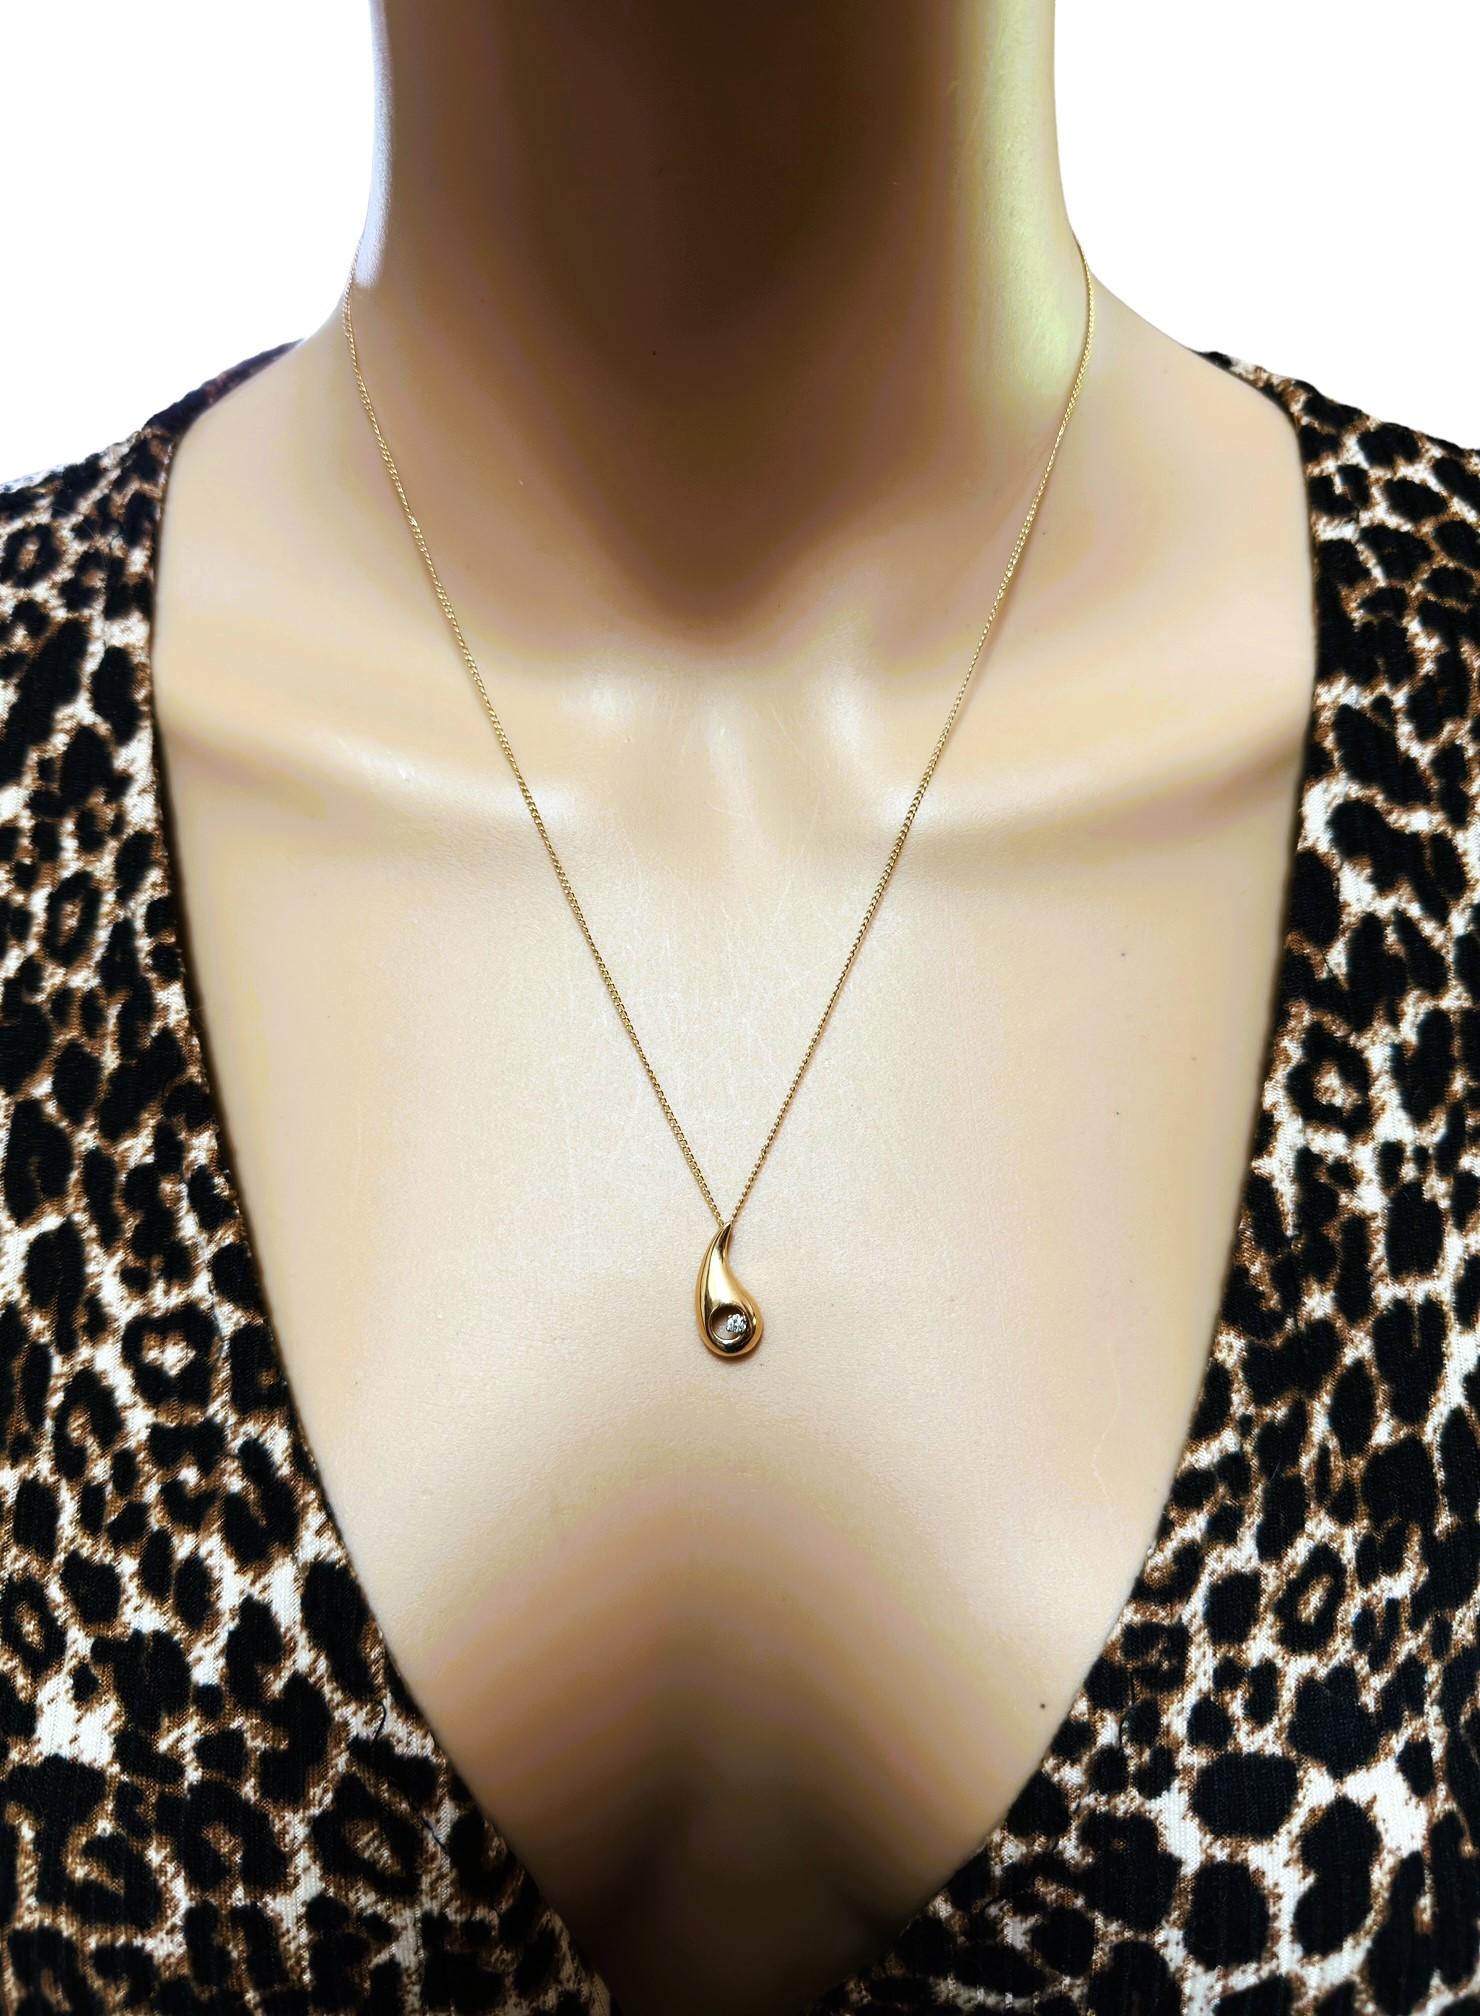 This is a very pretty solitaire pendant!  I just love the teardrop design .  And it's on a beautiful chain measuring 18.5 inches.   It has 1 Brilliant cut diamond placed strategically on the Tear Drop.  The pendant itself is ..63 inches long and